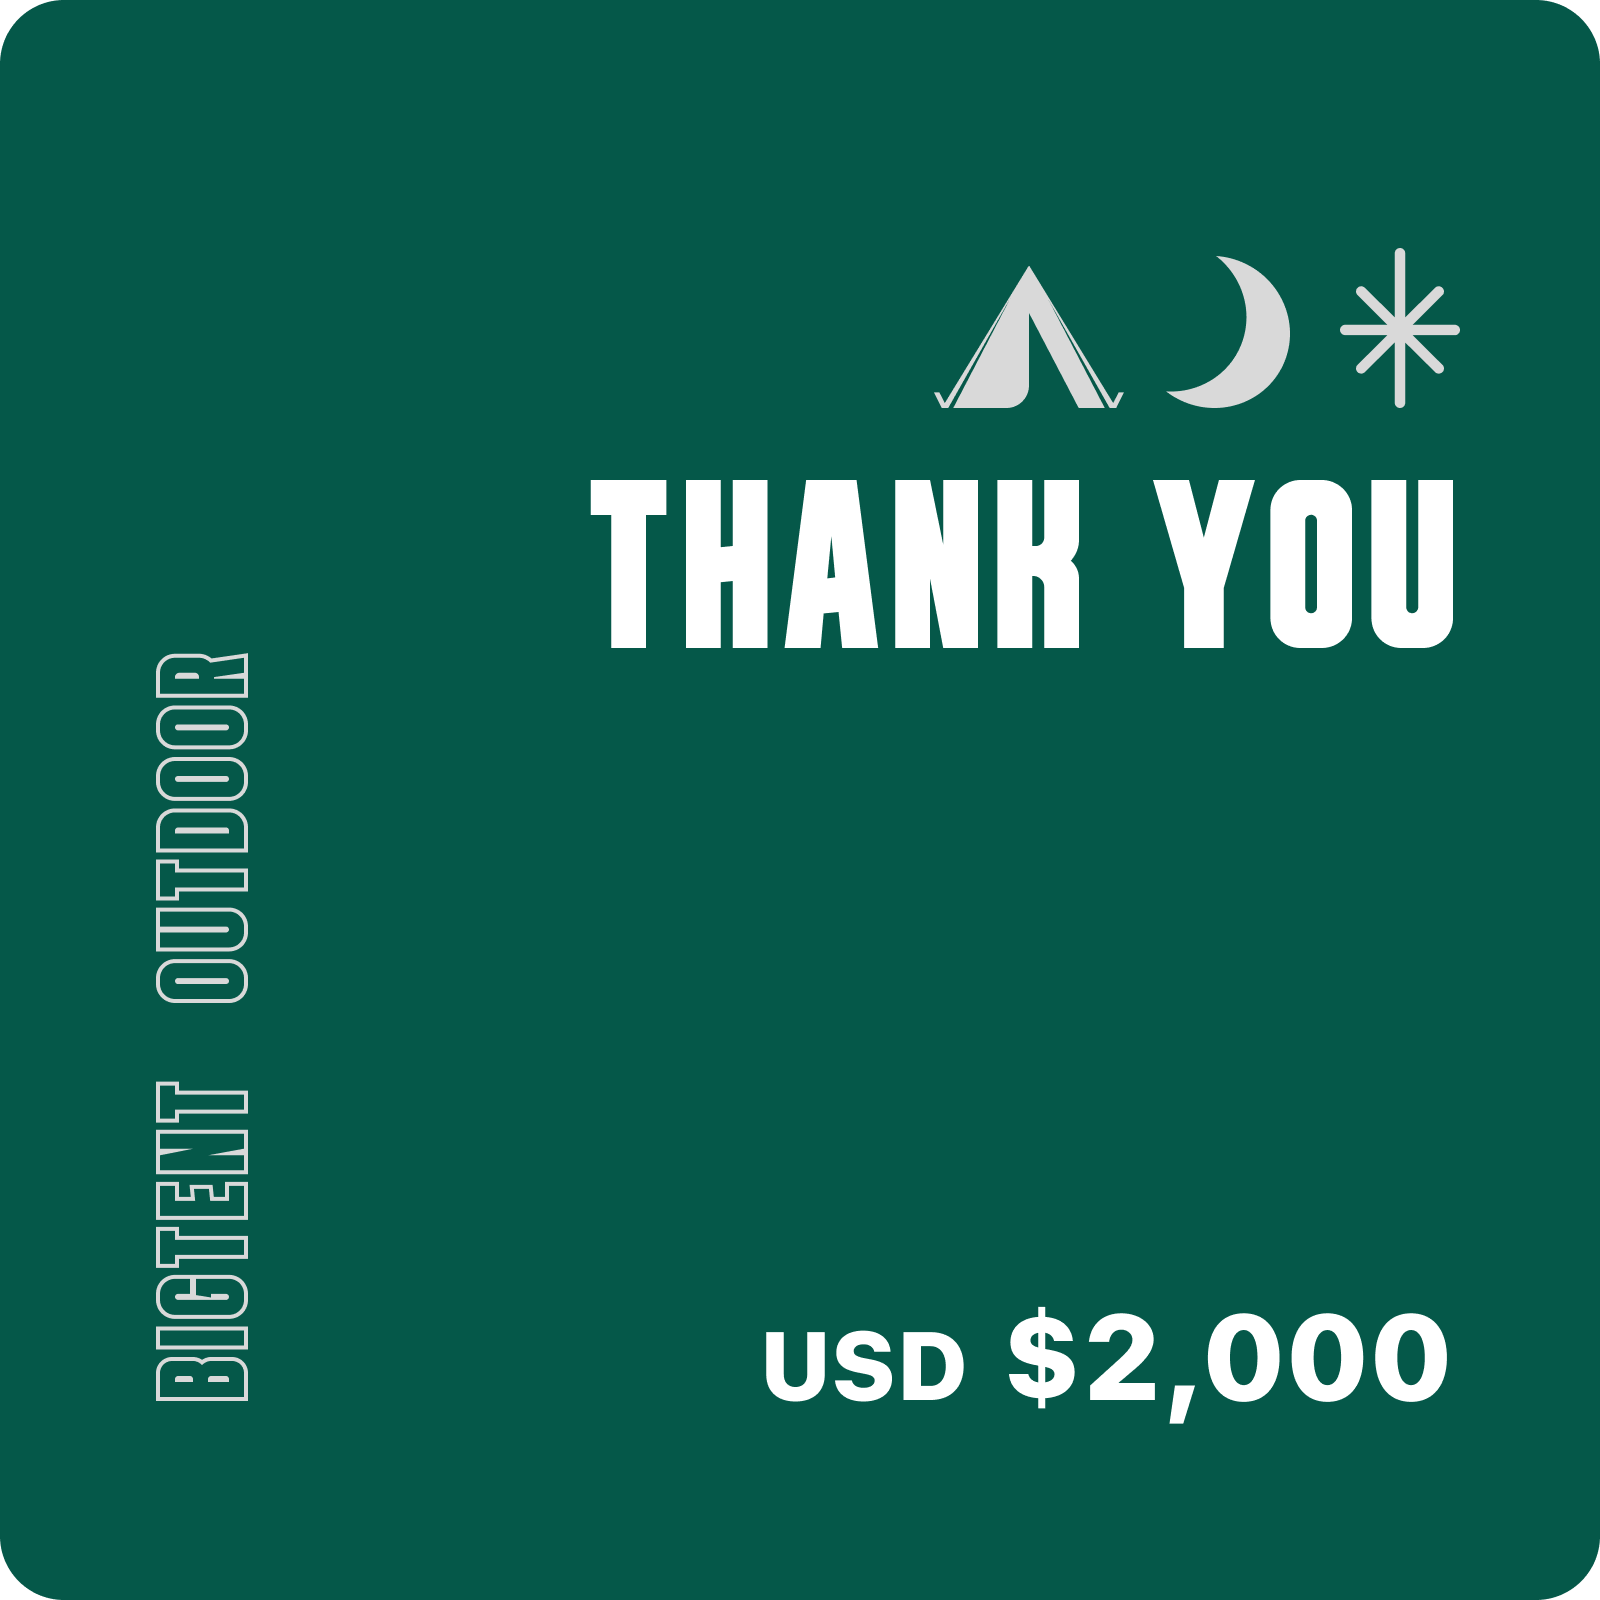 bigtent giftcard $2,000 usd